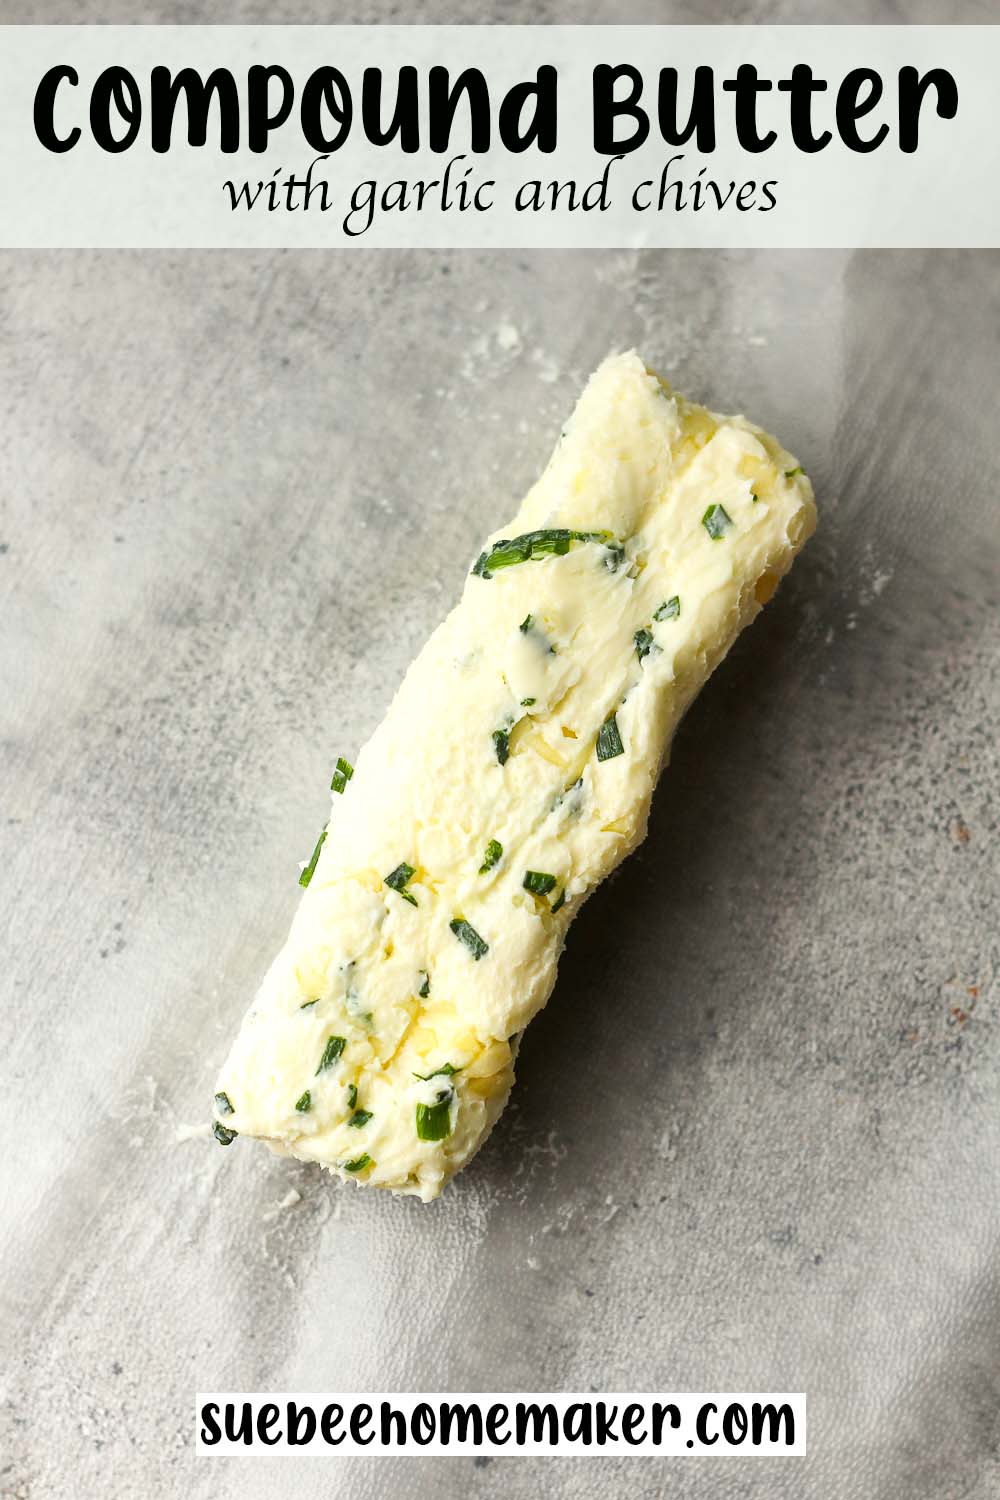 A log of compound butter with garlic and chives.